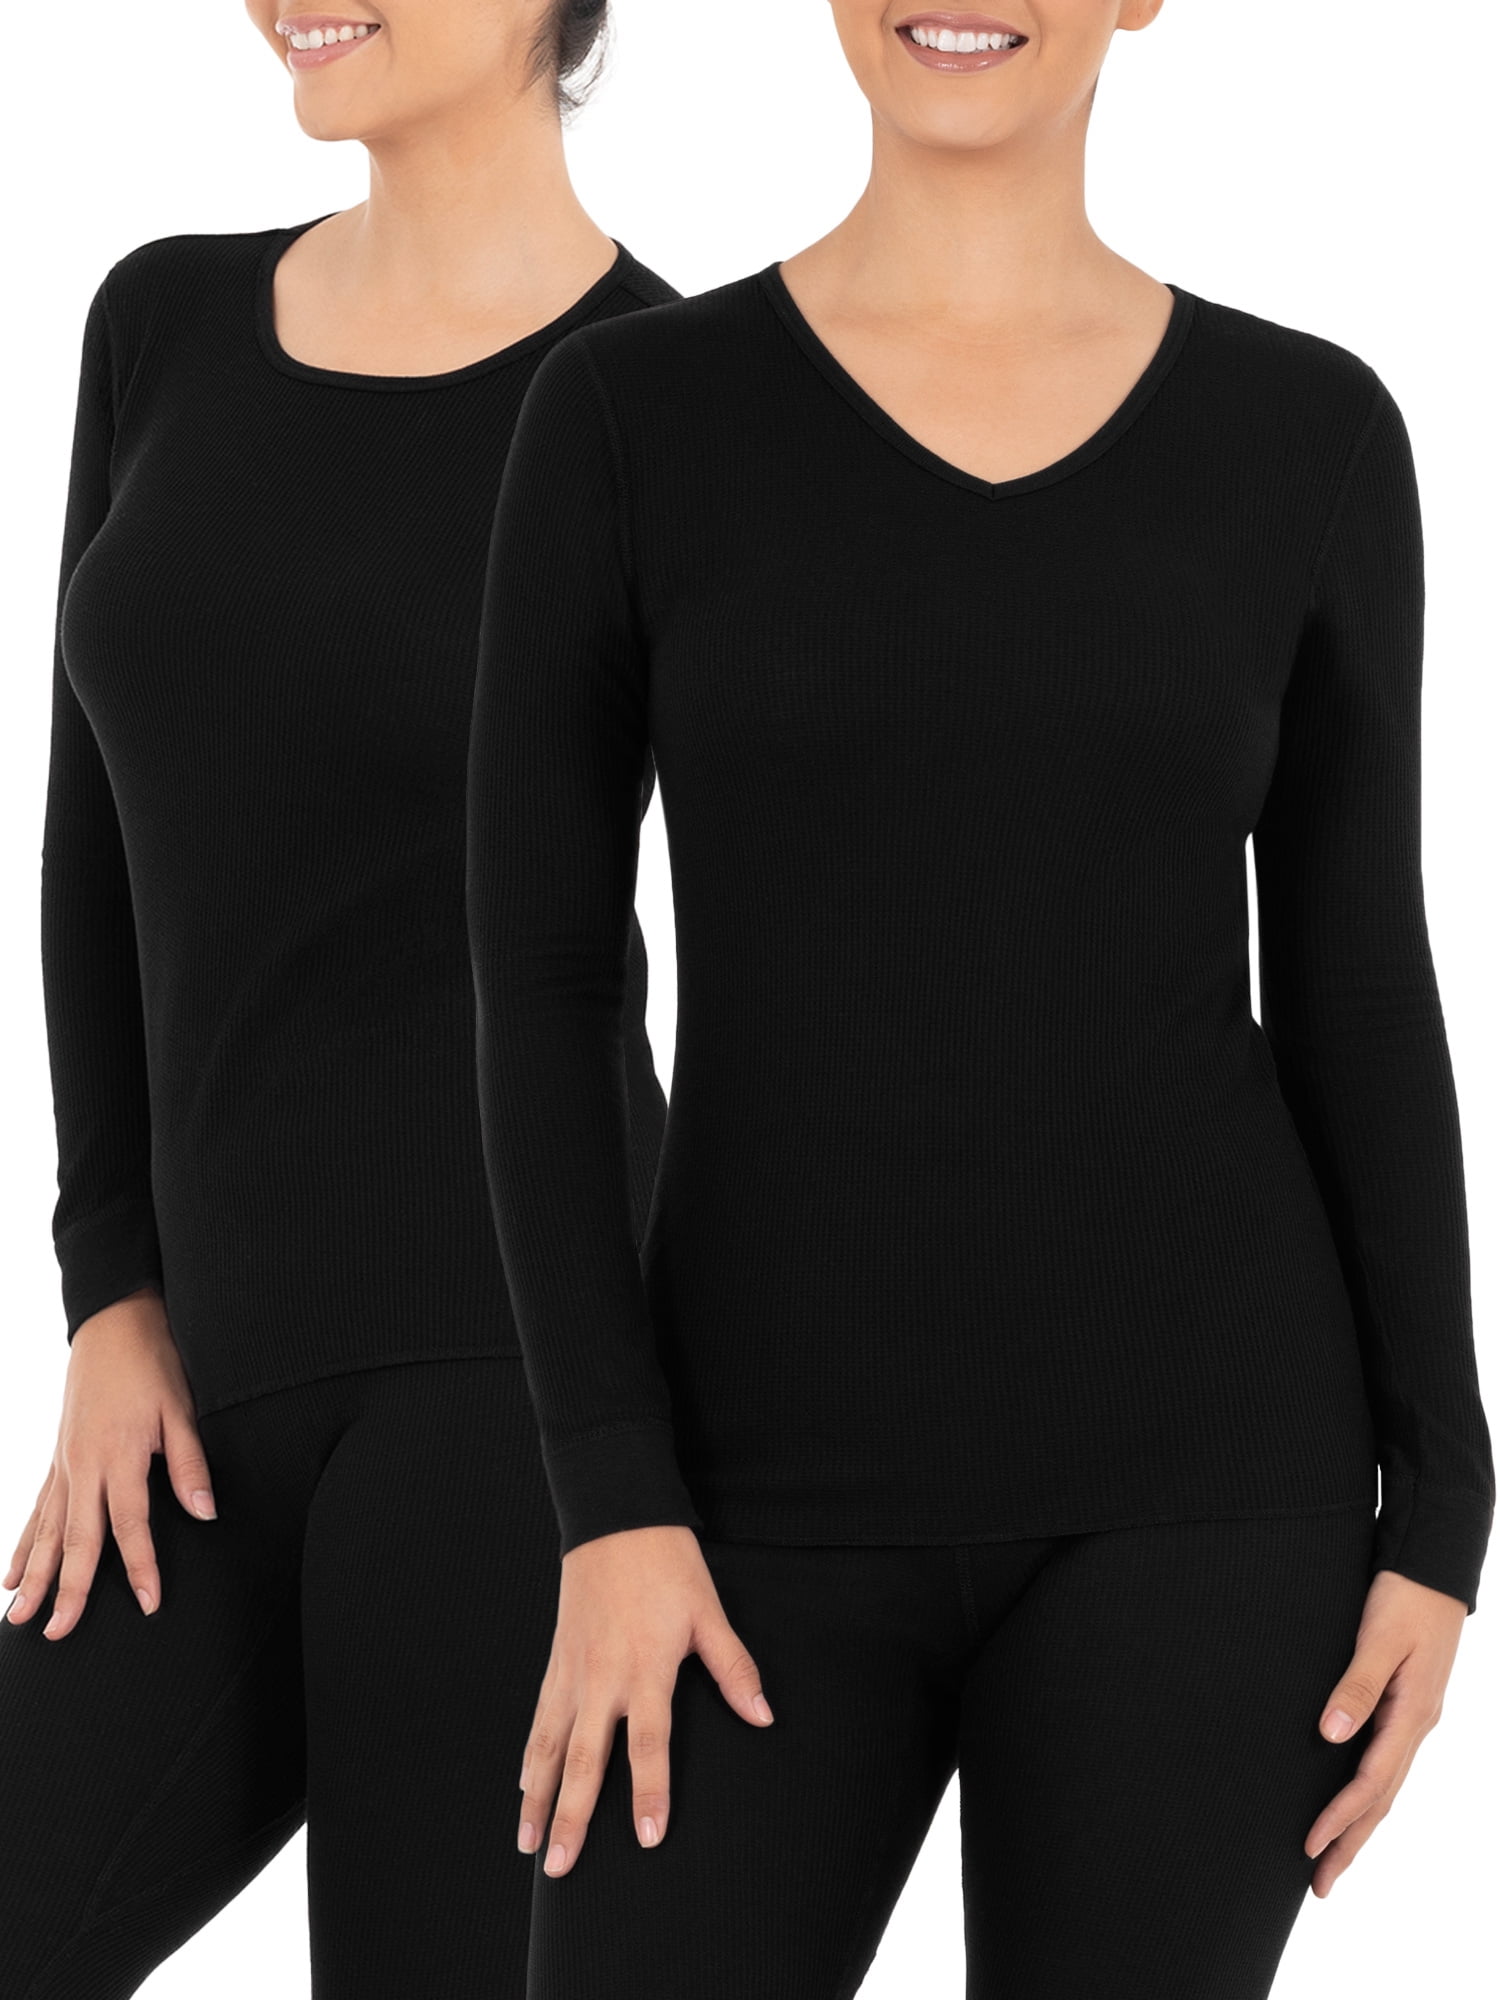 Fruit of the Loom Women's Long Underwear Waffle Crew and V-Neck Thermal Top,  2-Pack 